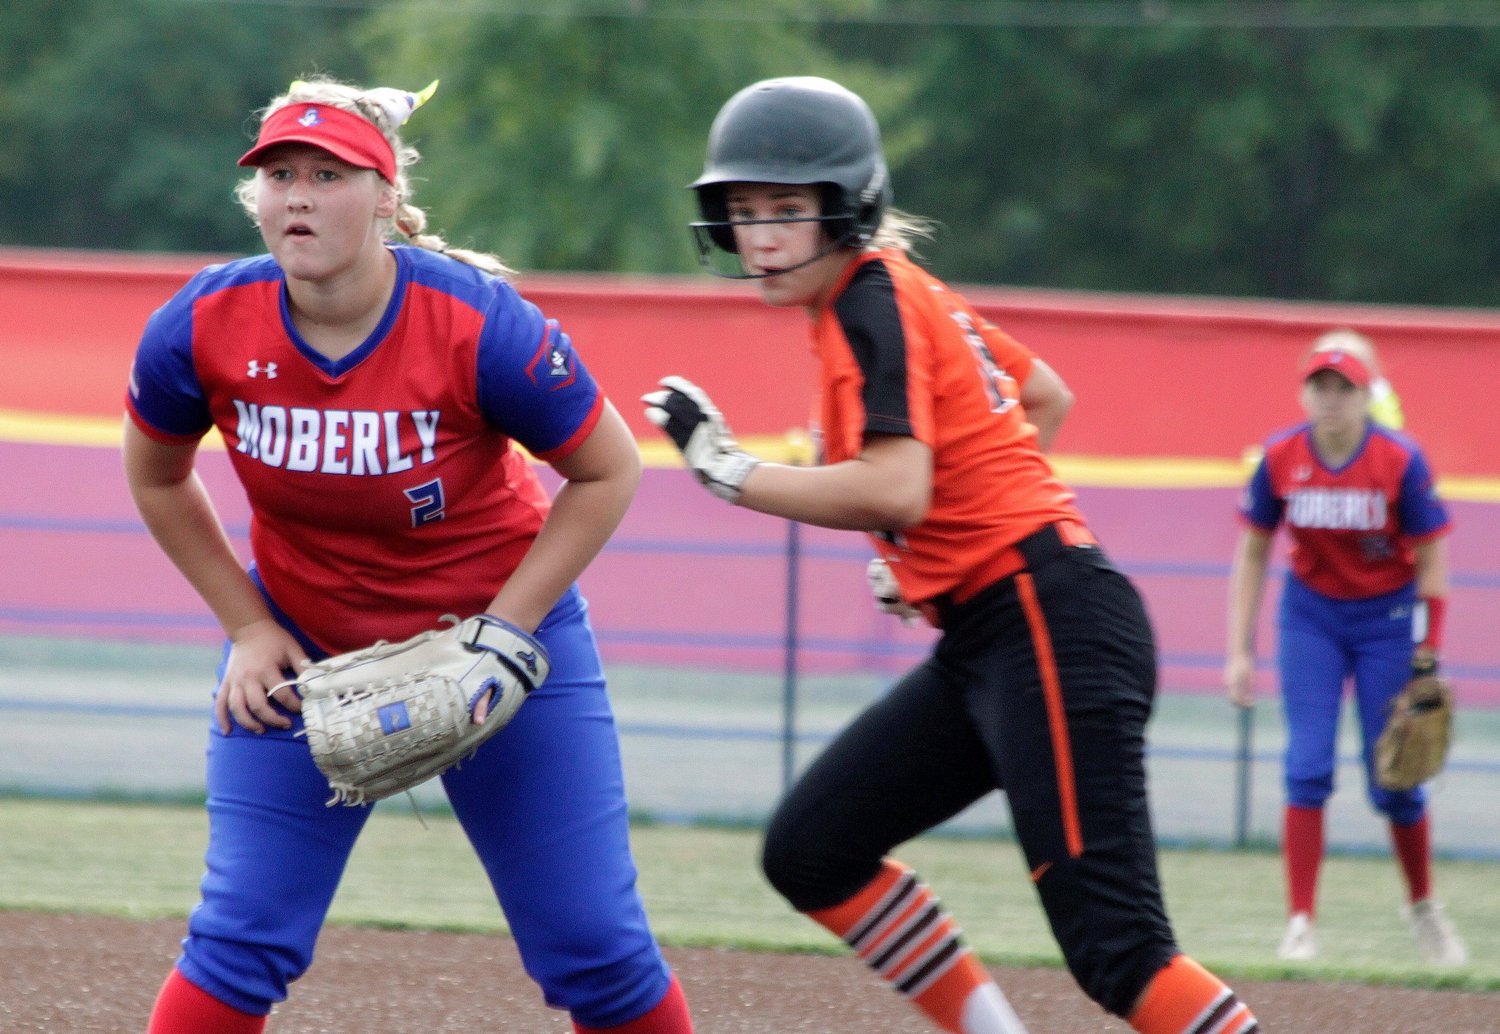 Moberly sophomore starting first baseman Taylor Martin readies herself into defensive position while Kirksville's Mallory Lymer dashes toward second base on a batted ball during the second inning of Thursday's softball game at Moberly. The Lady Spartans lost 6-3.